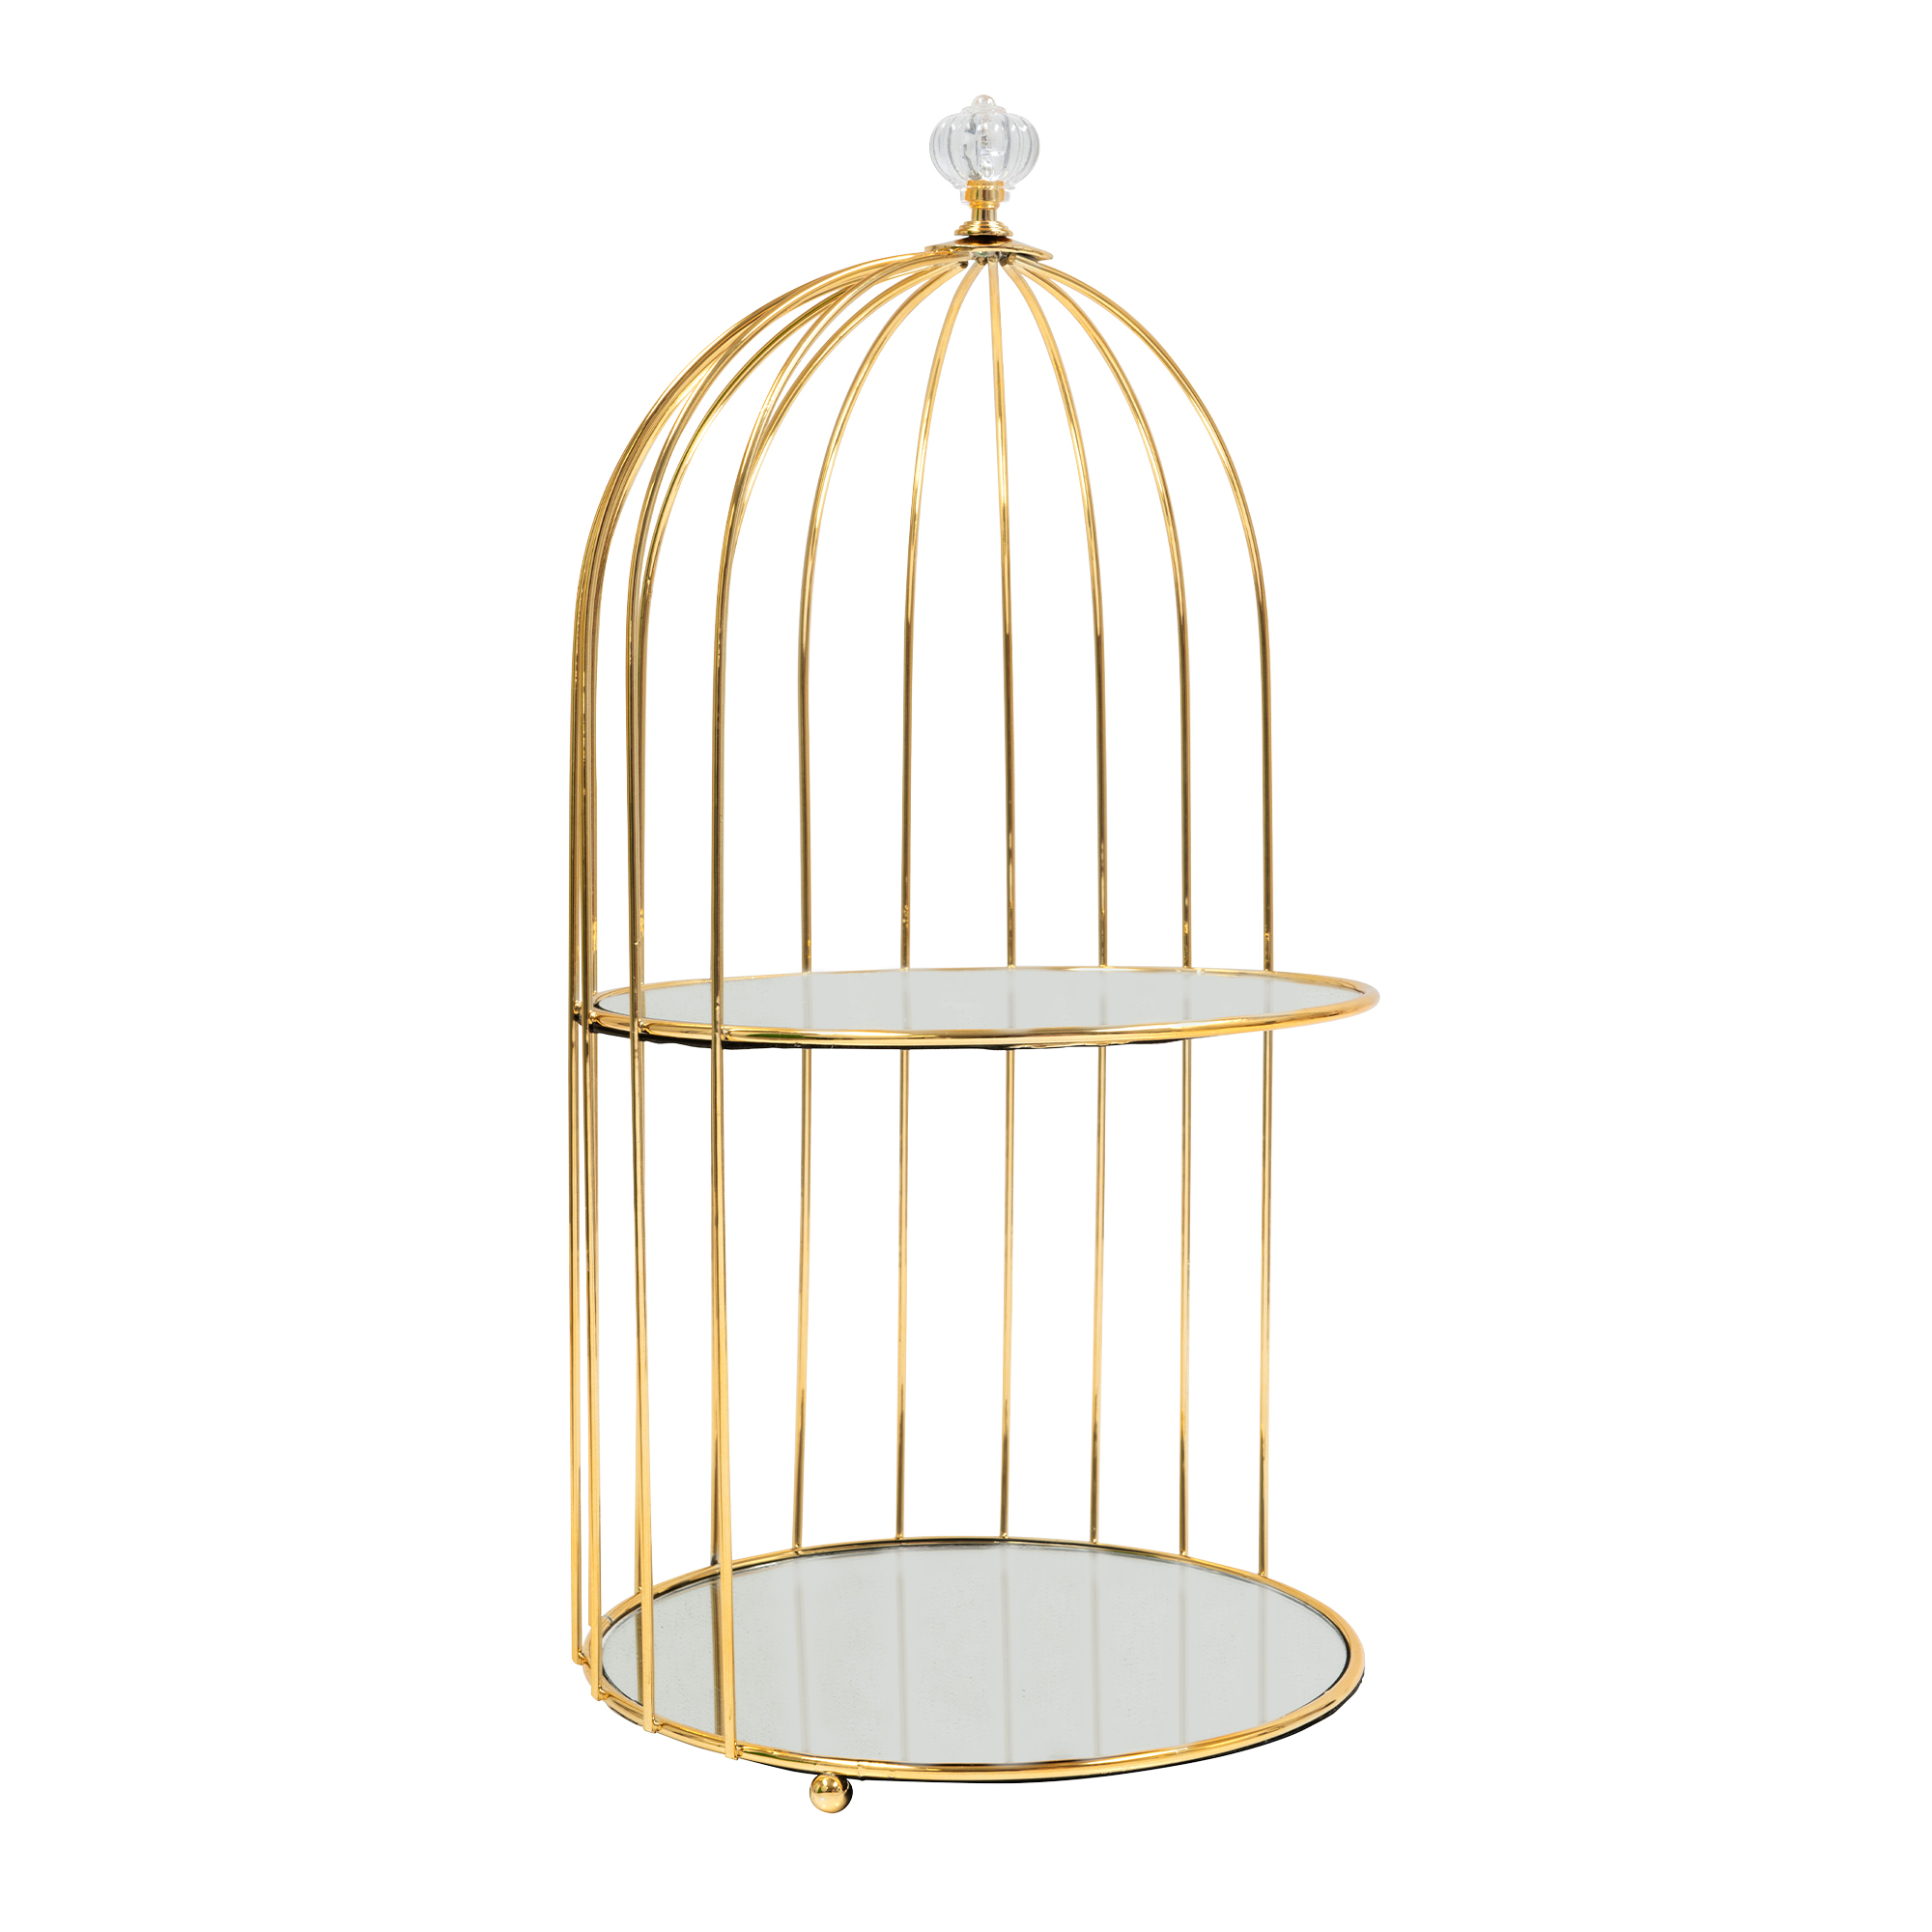 2 Layer Birdcage Cake Stand With Mirror 15½" - Gold